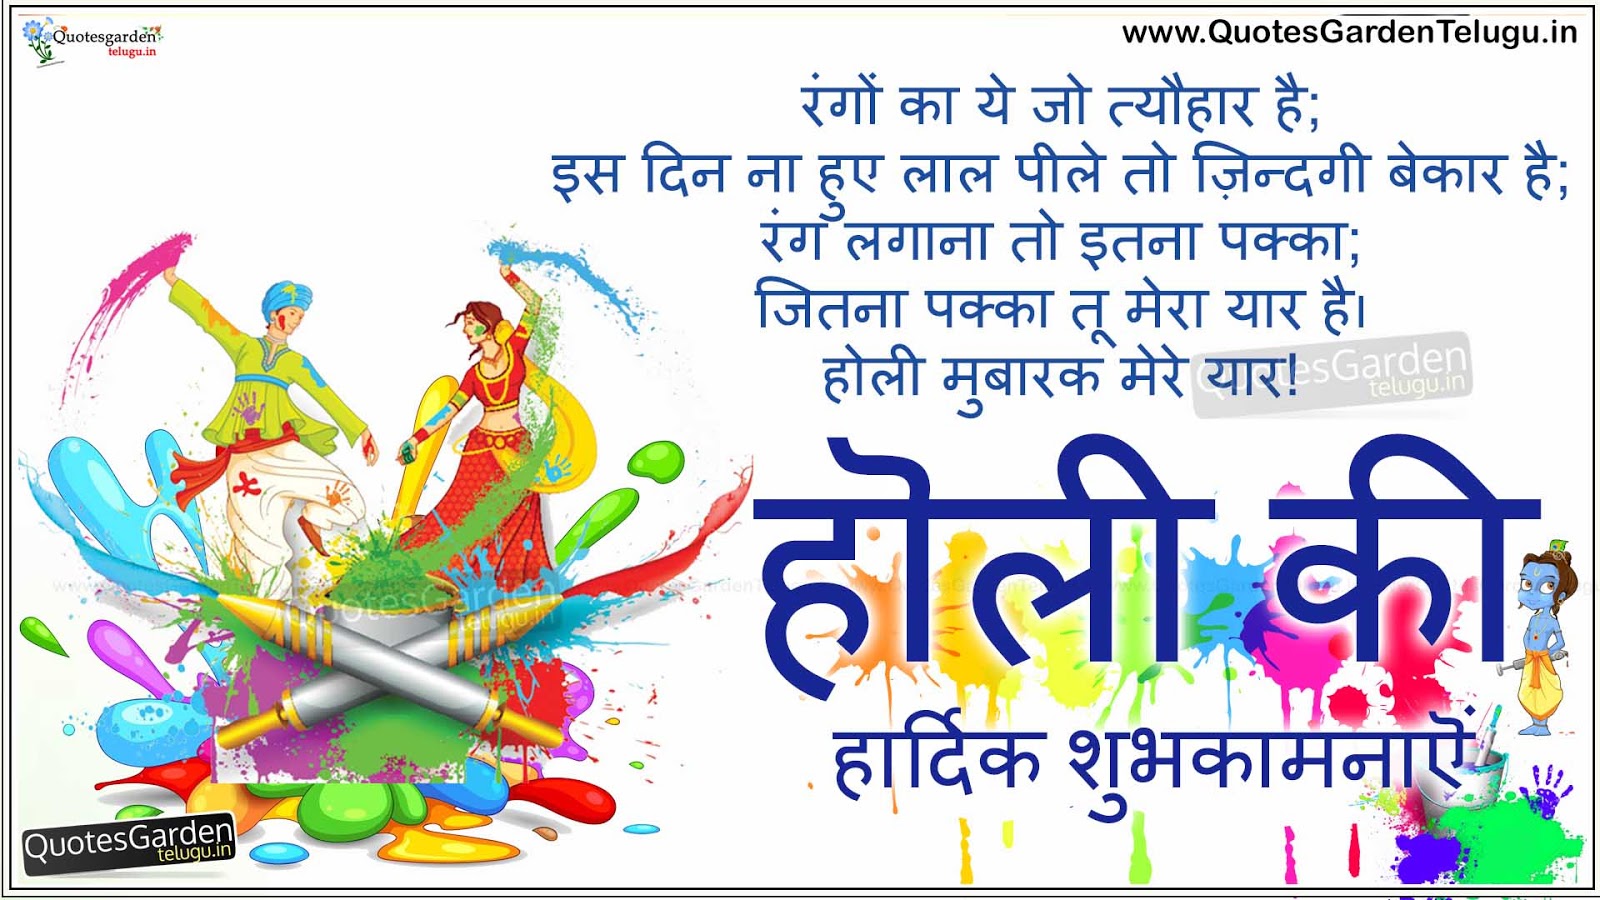 Best Holi 2016 Greetings wishes wallpapers in Hindi | QUOTES ...